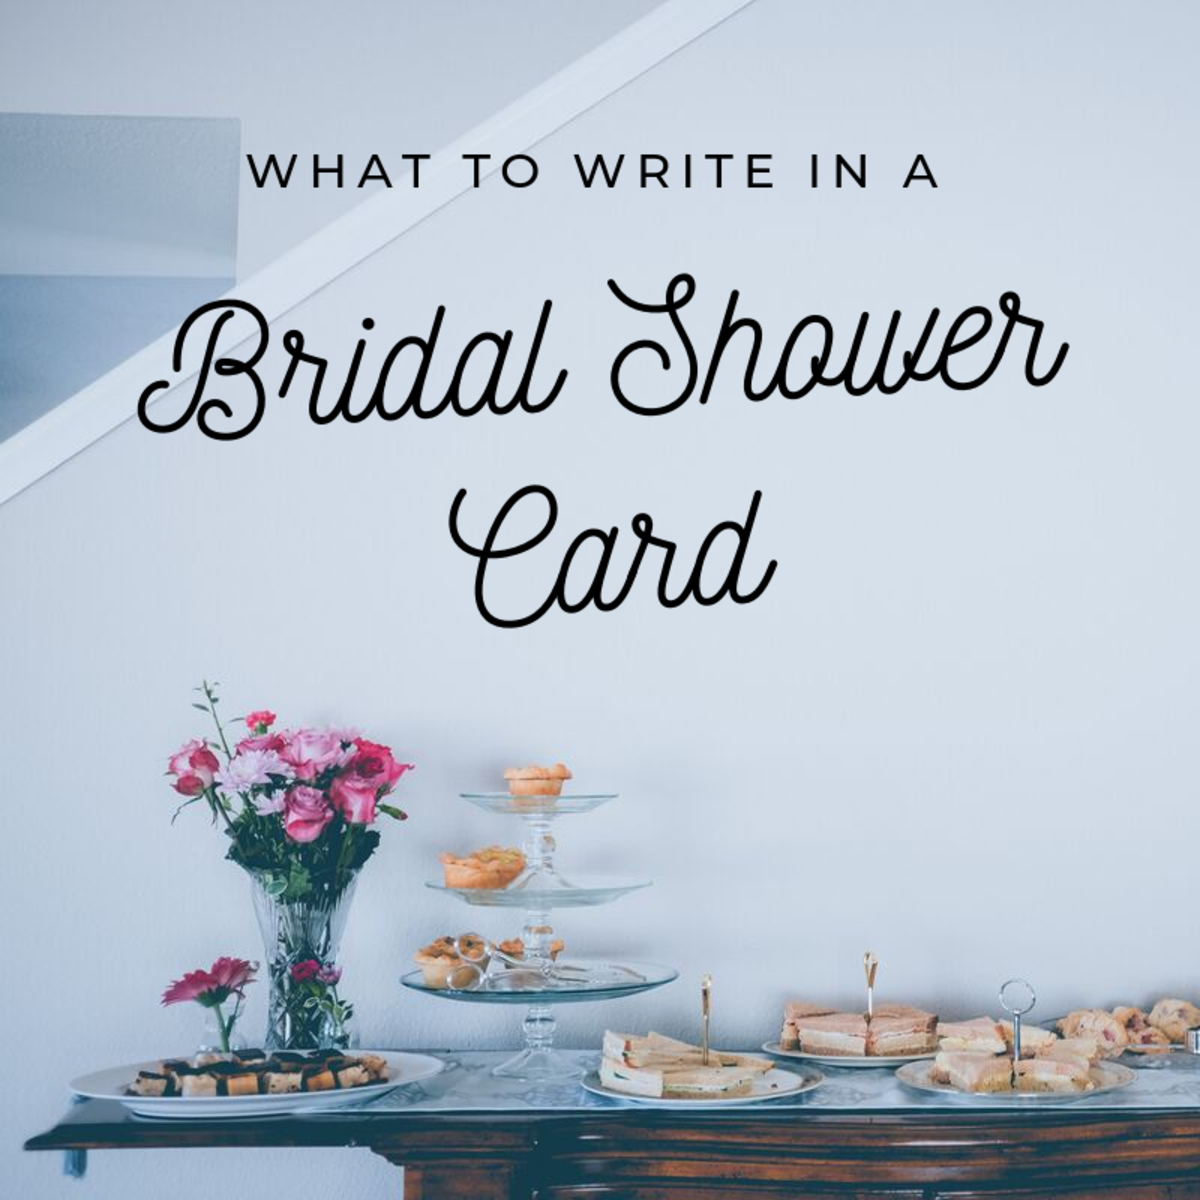 Funny bridal shower quotes and sayings